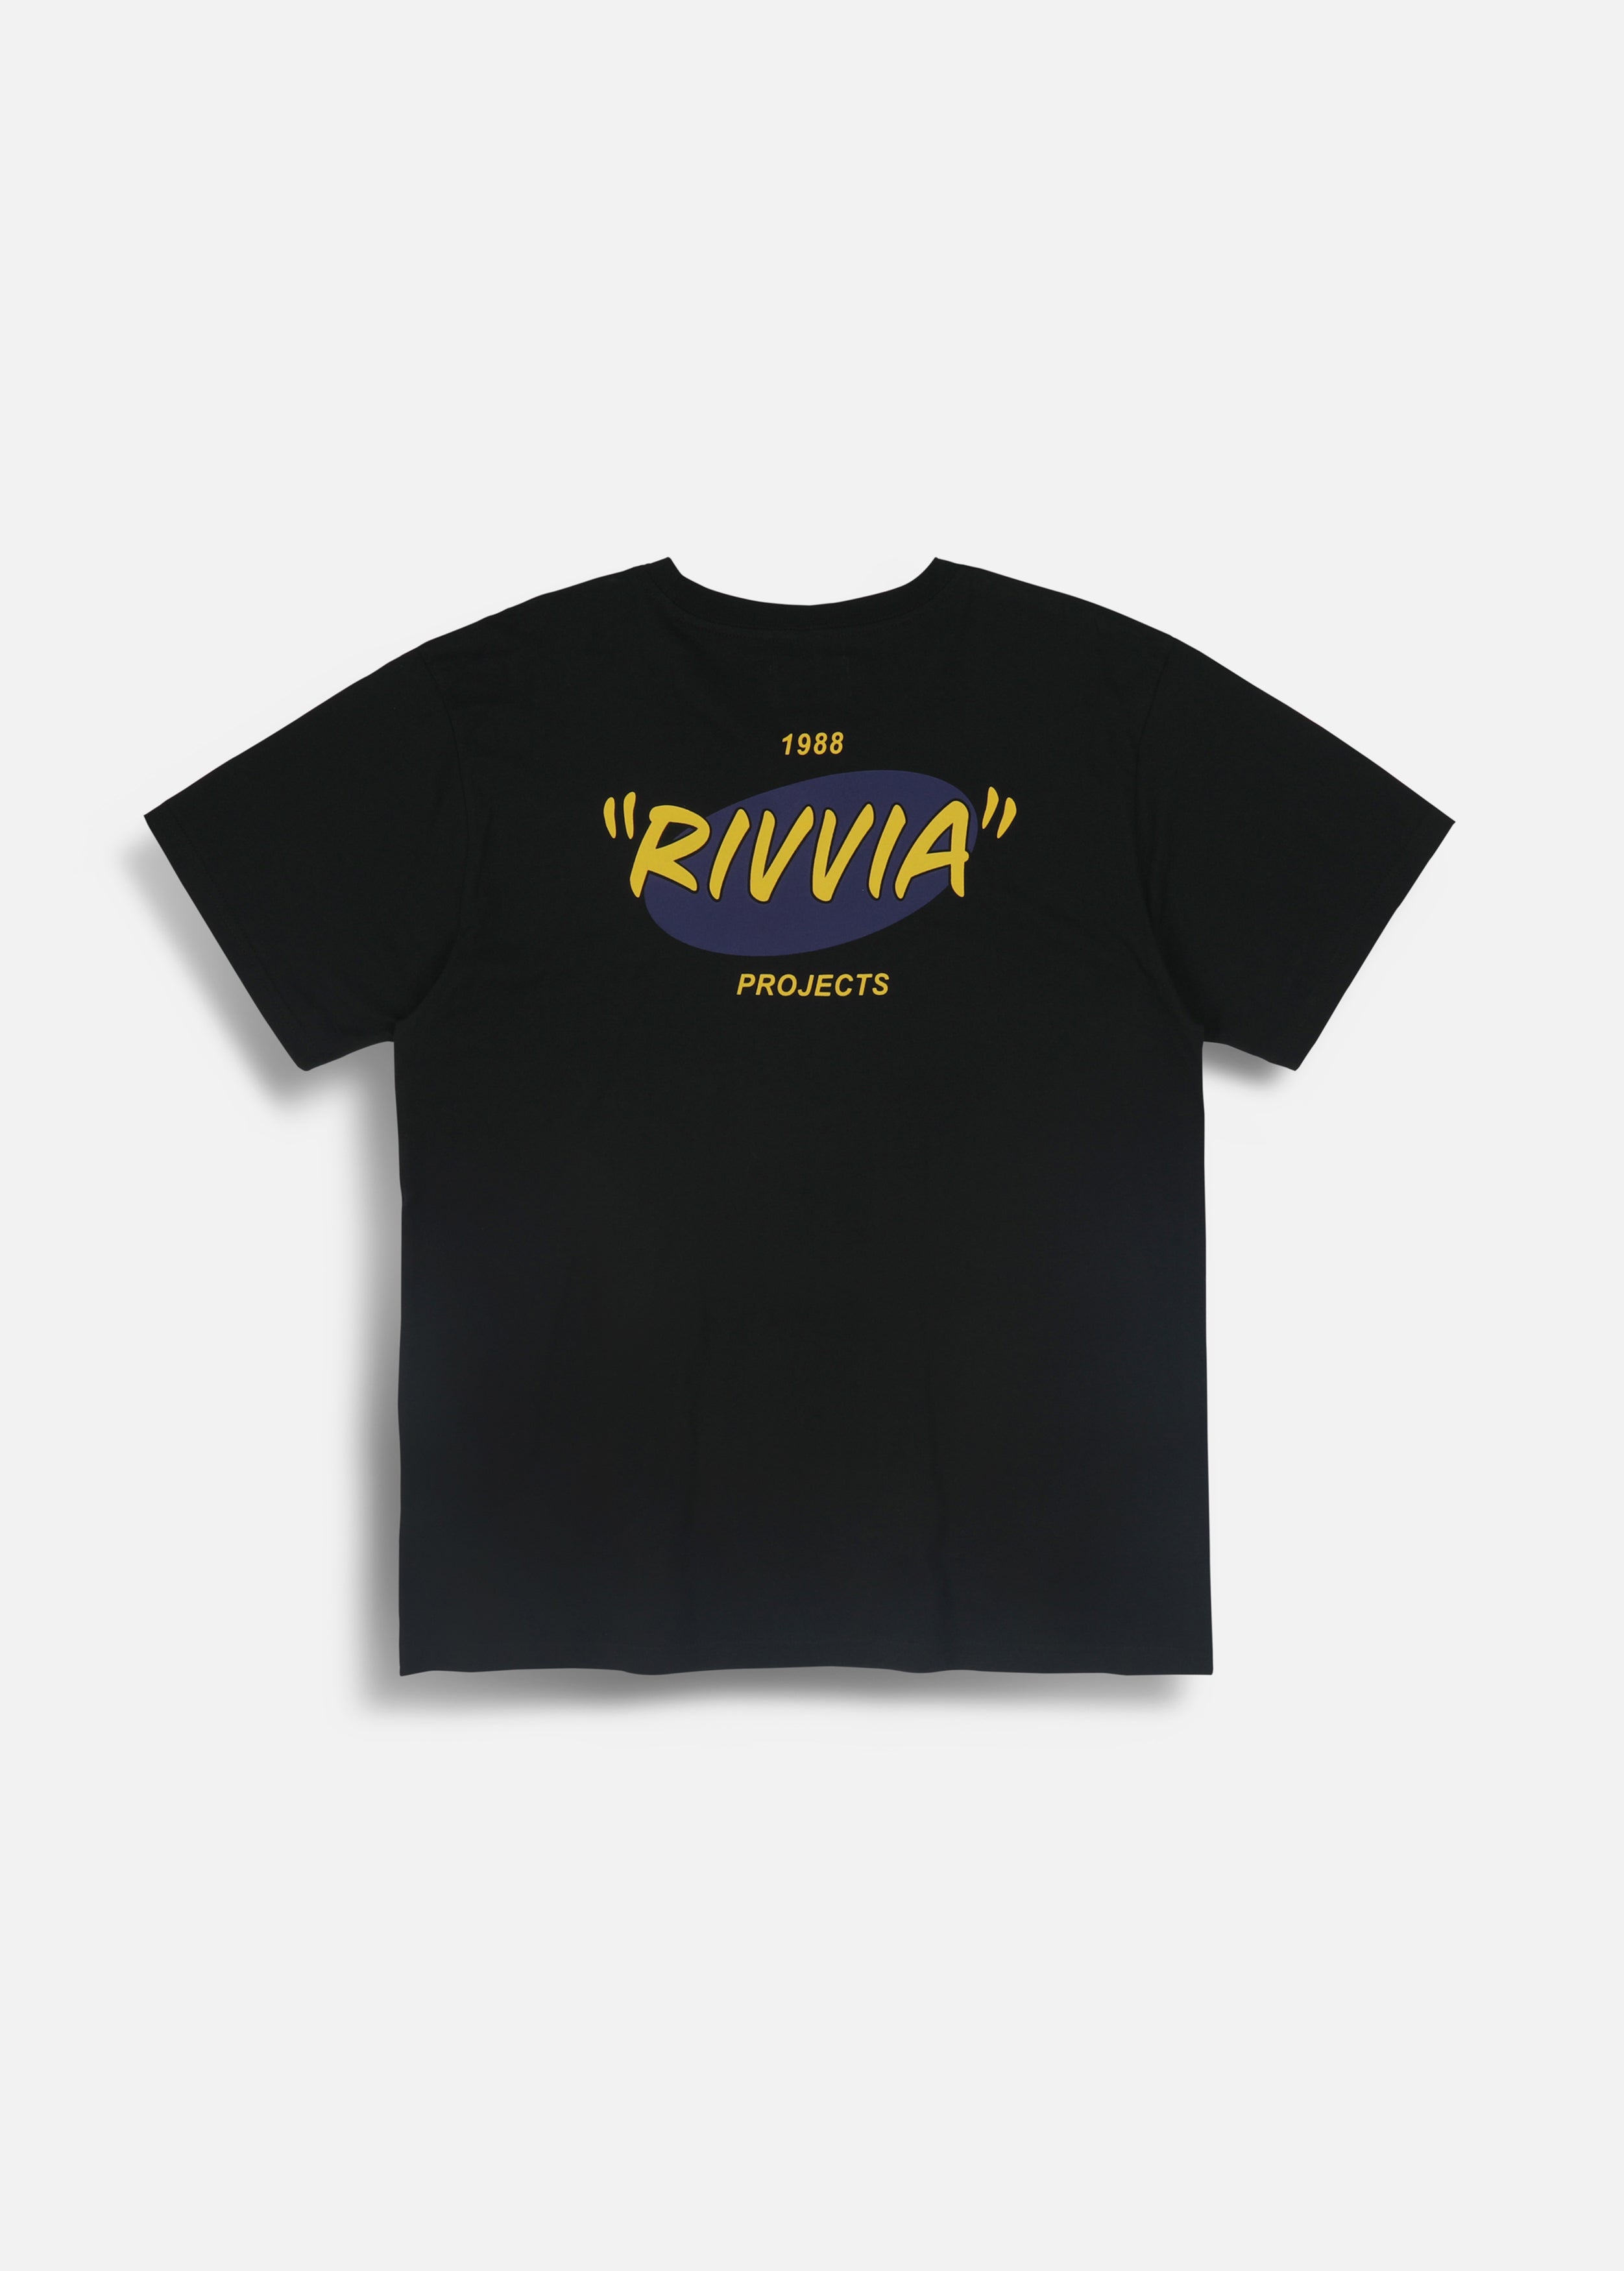 COLLECTION_001 – Rivvia Projects